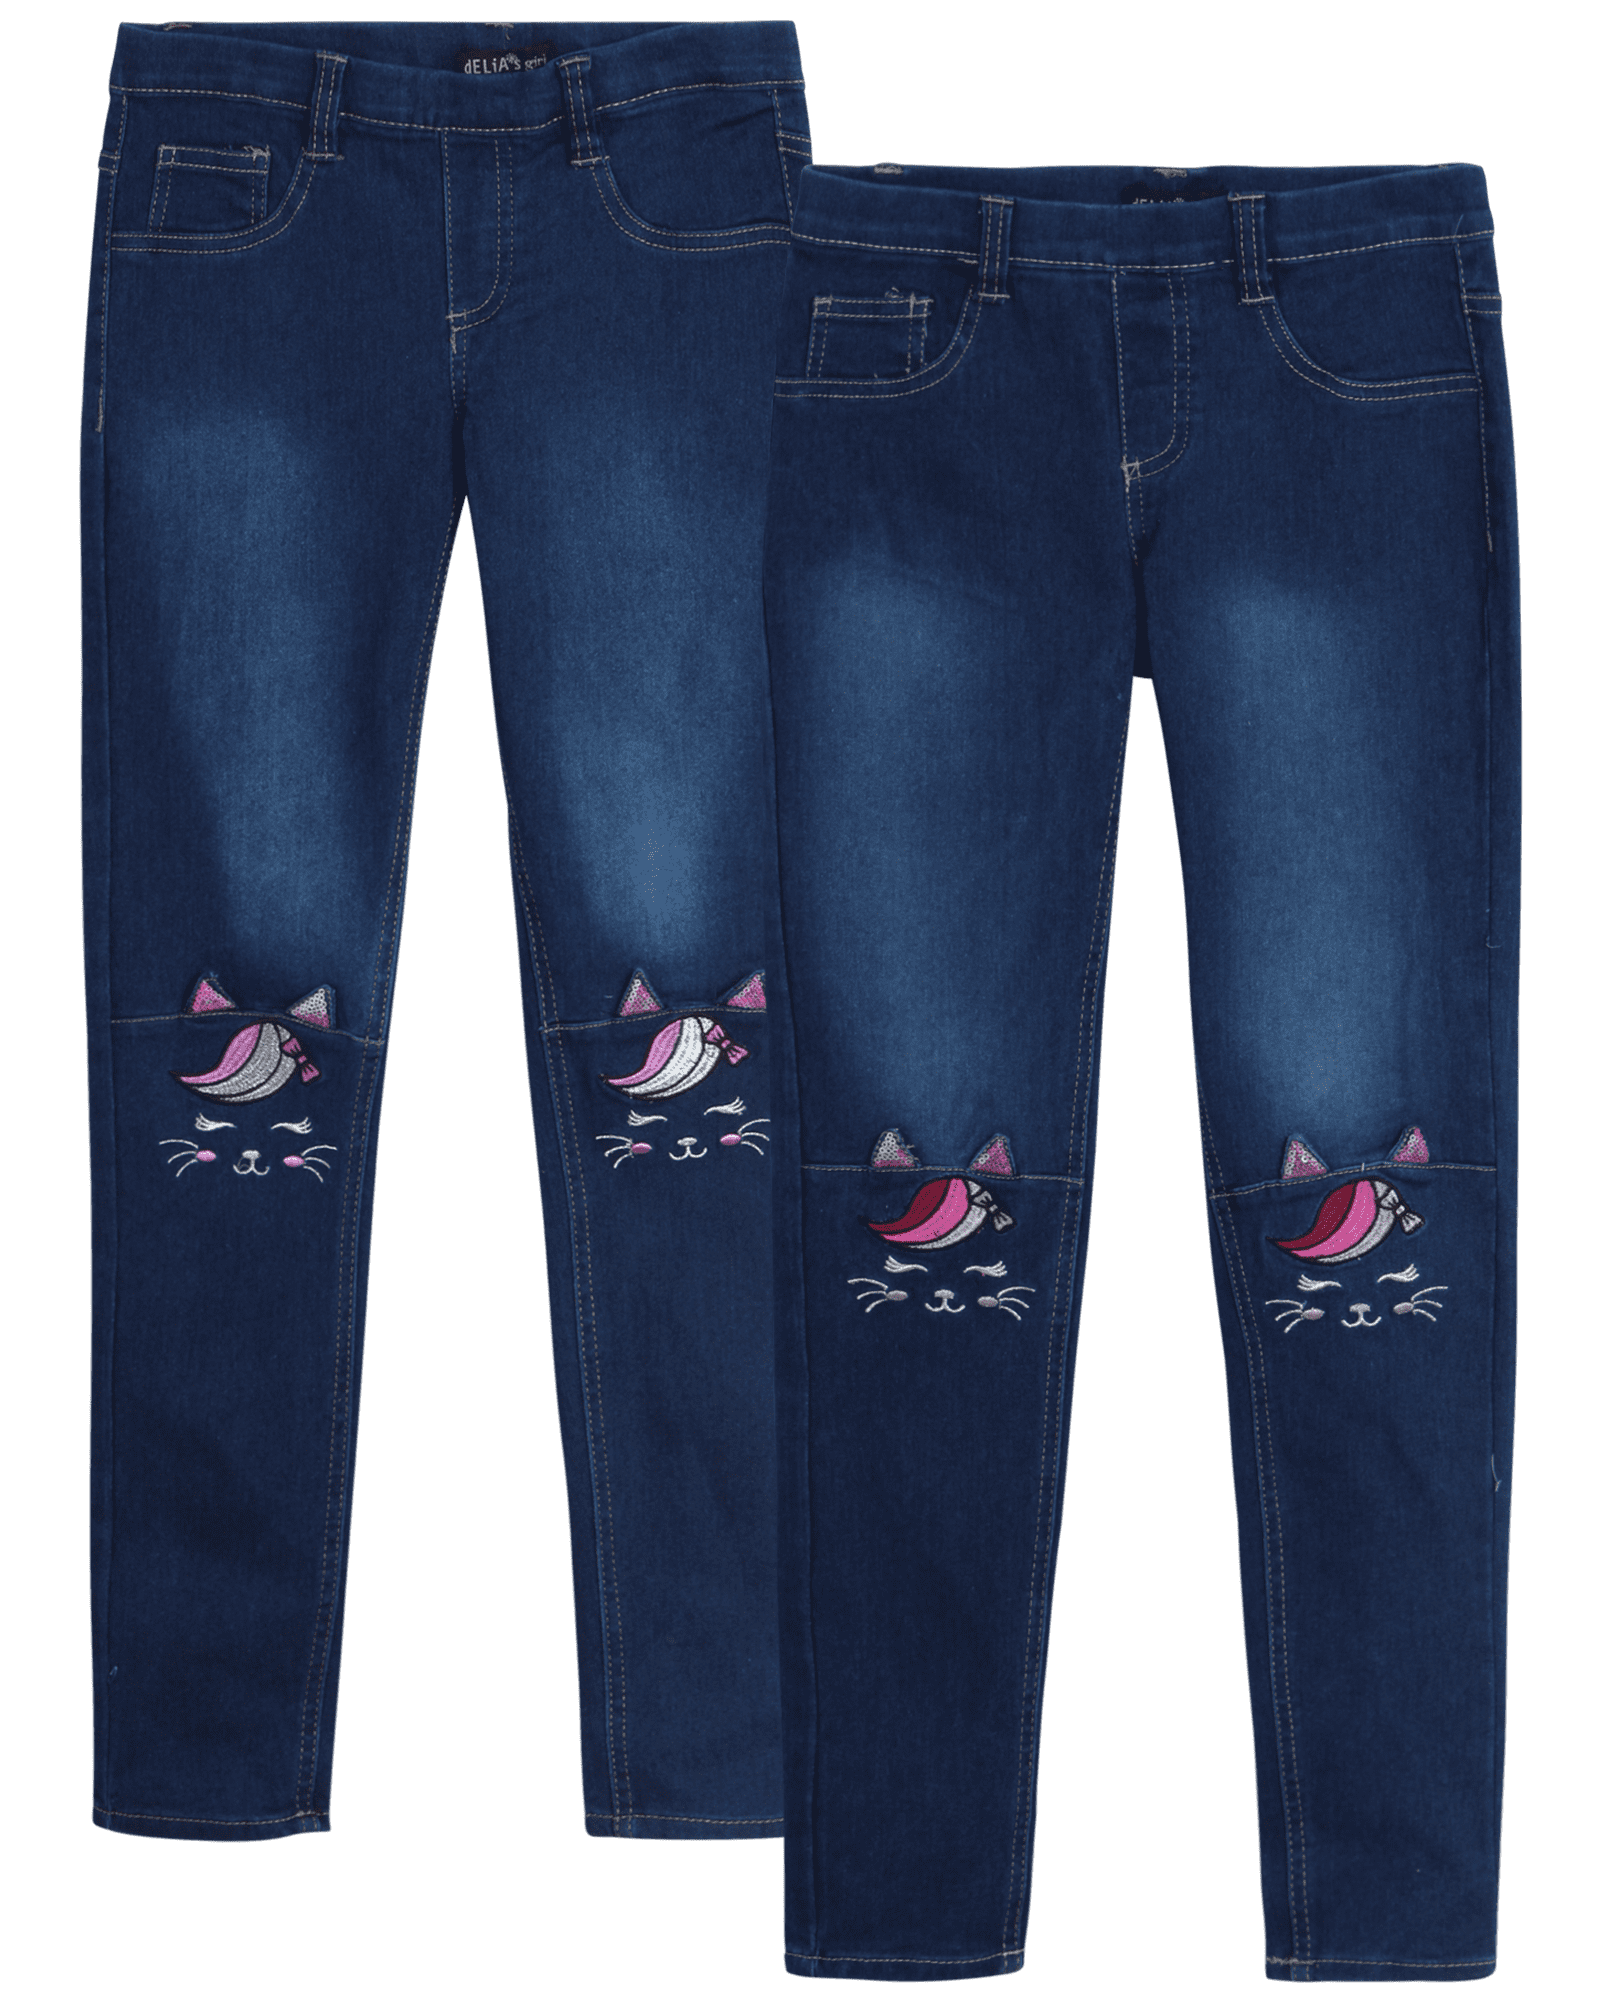 dELiA*s Girls’ Super Stretch Denim Jegging Jeans with Critter ...